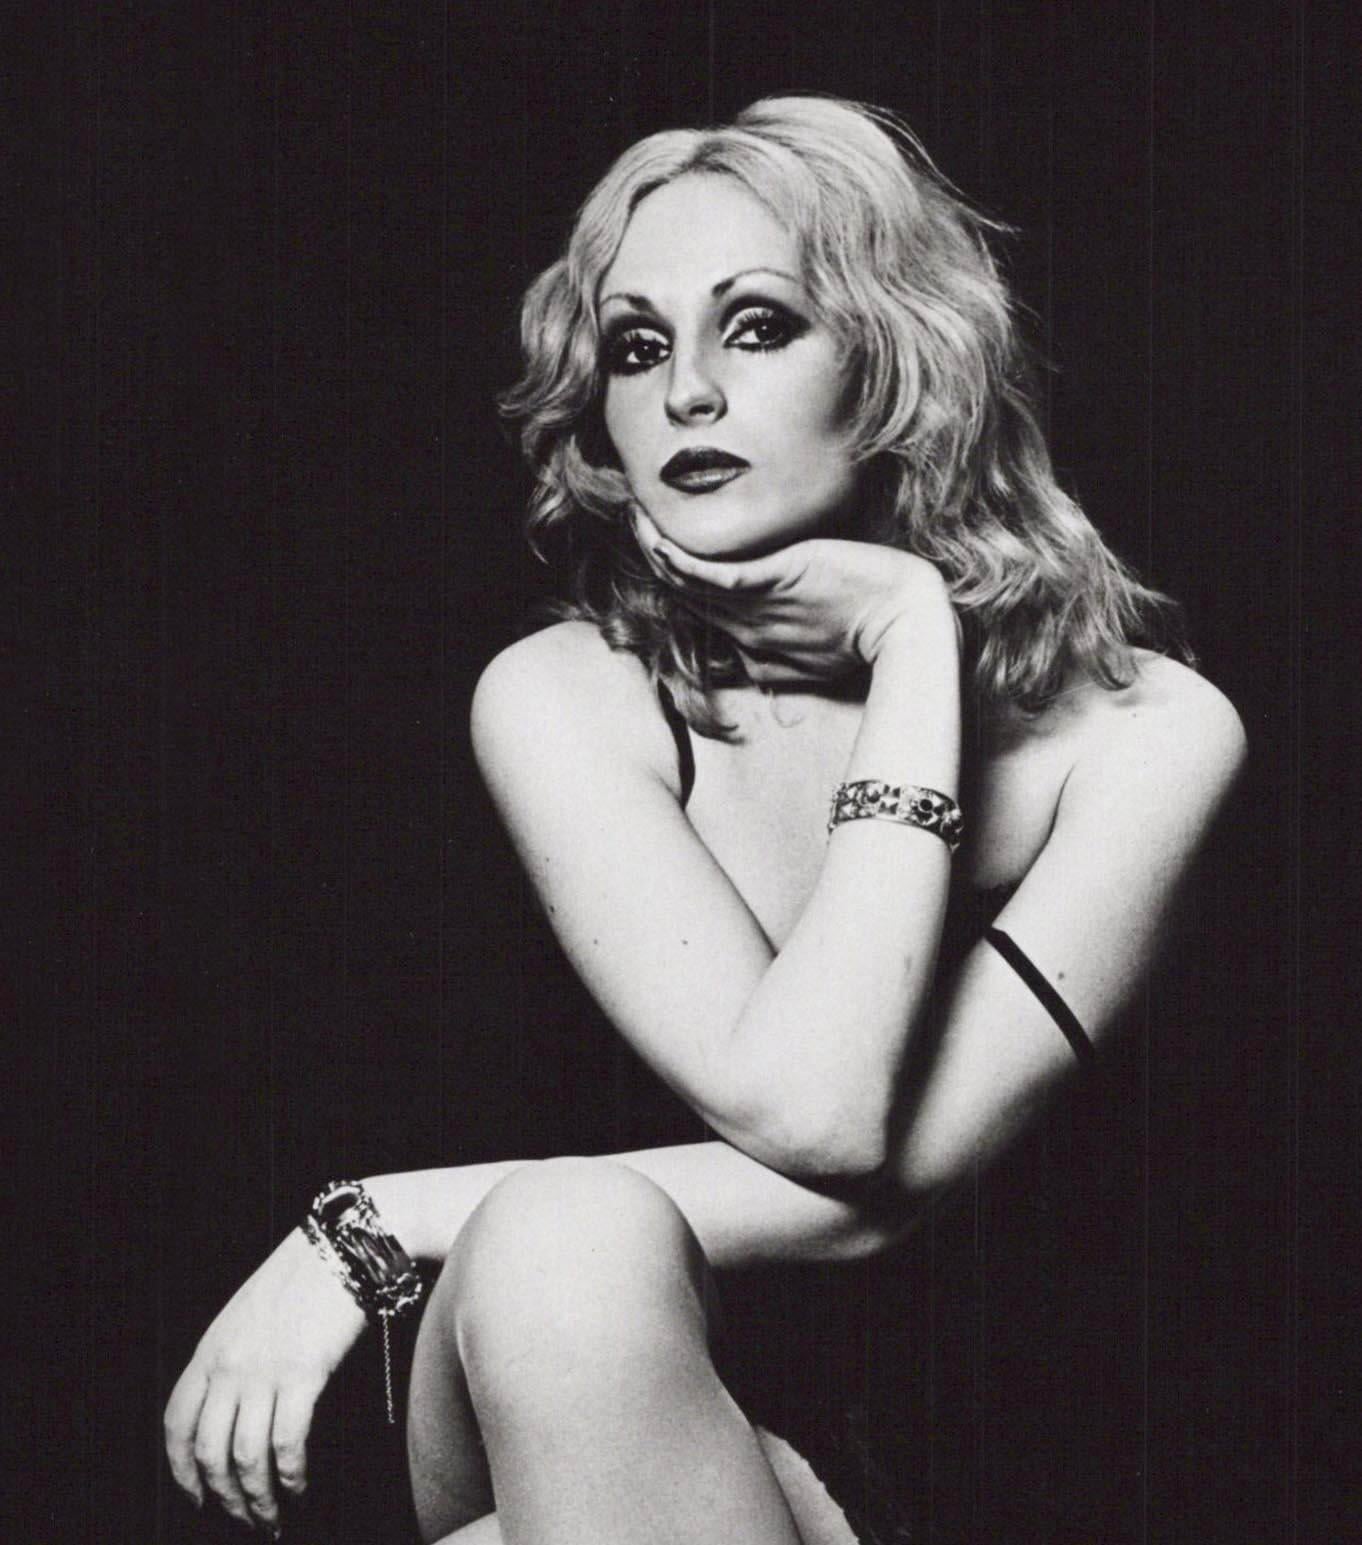 Andy Warhol Superstar Candy Darling Studio Portrait Used on Cover of After Dark - Photograph by Jack Mitchell